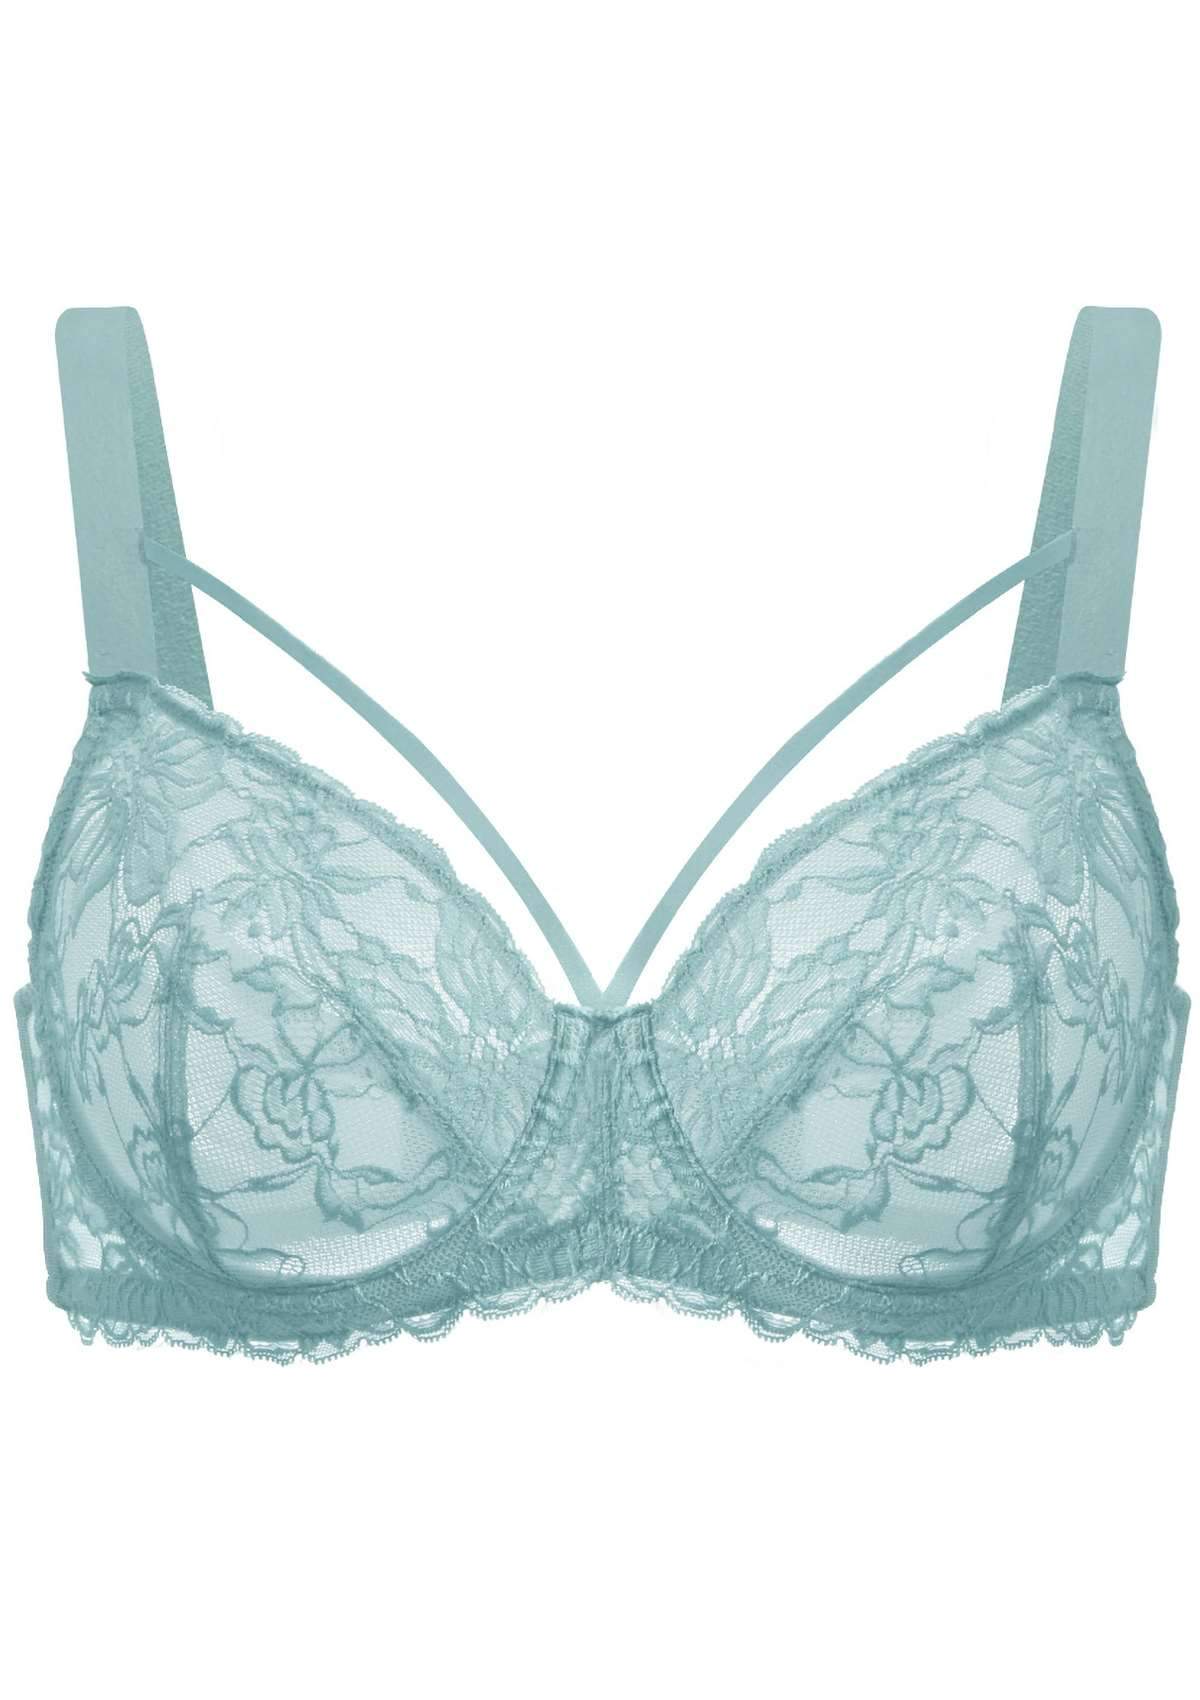 HSIA Pretty In Petals Unlined Lace Bra: Comfortable And Supportive Bra - Crystal Blue / 40 / DDD/F